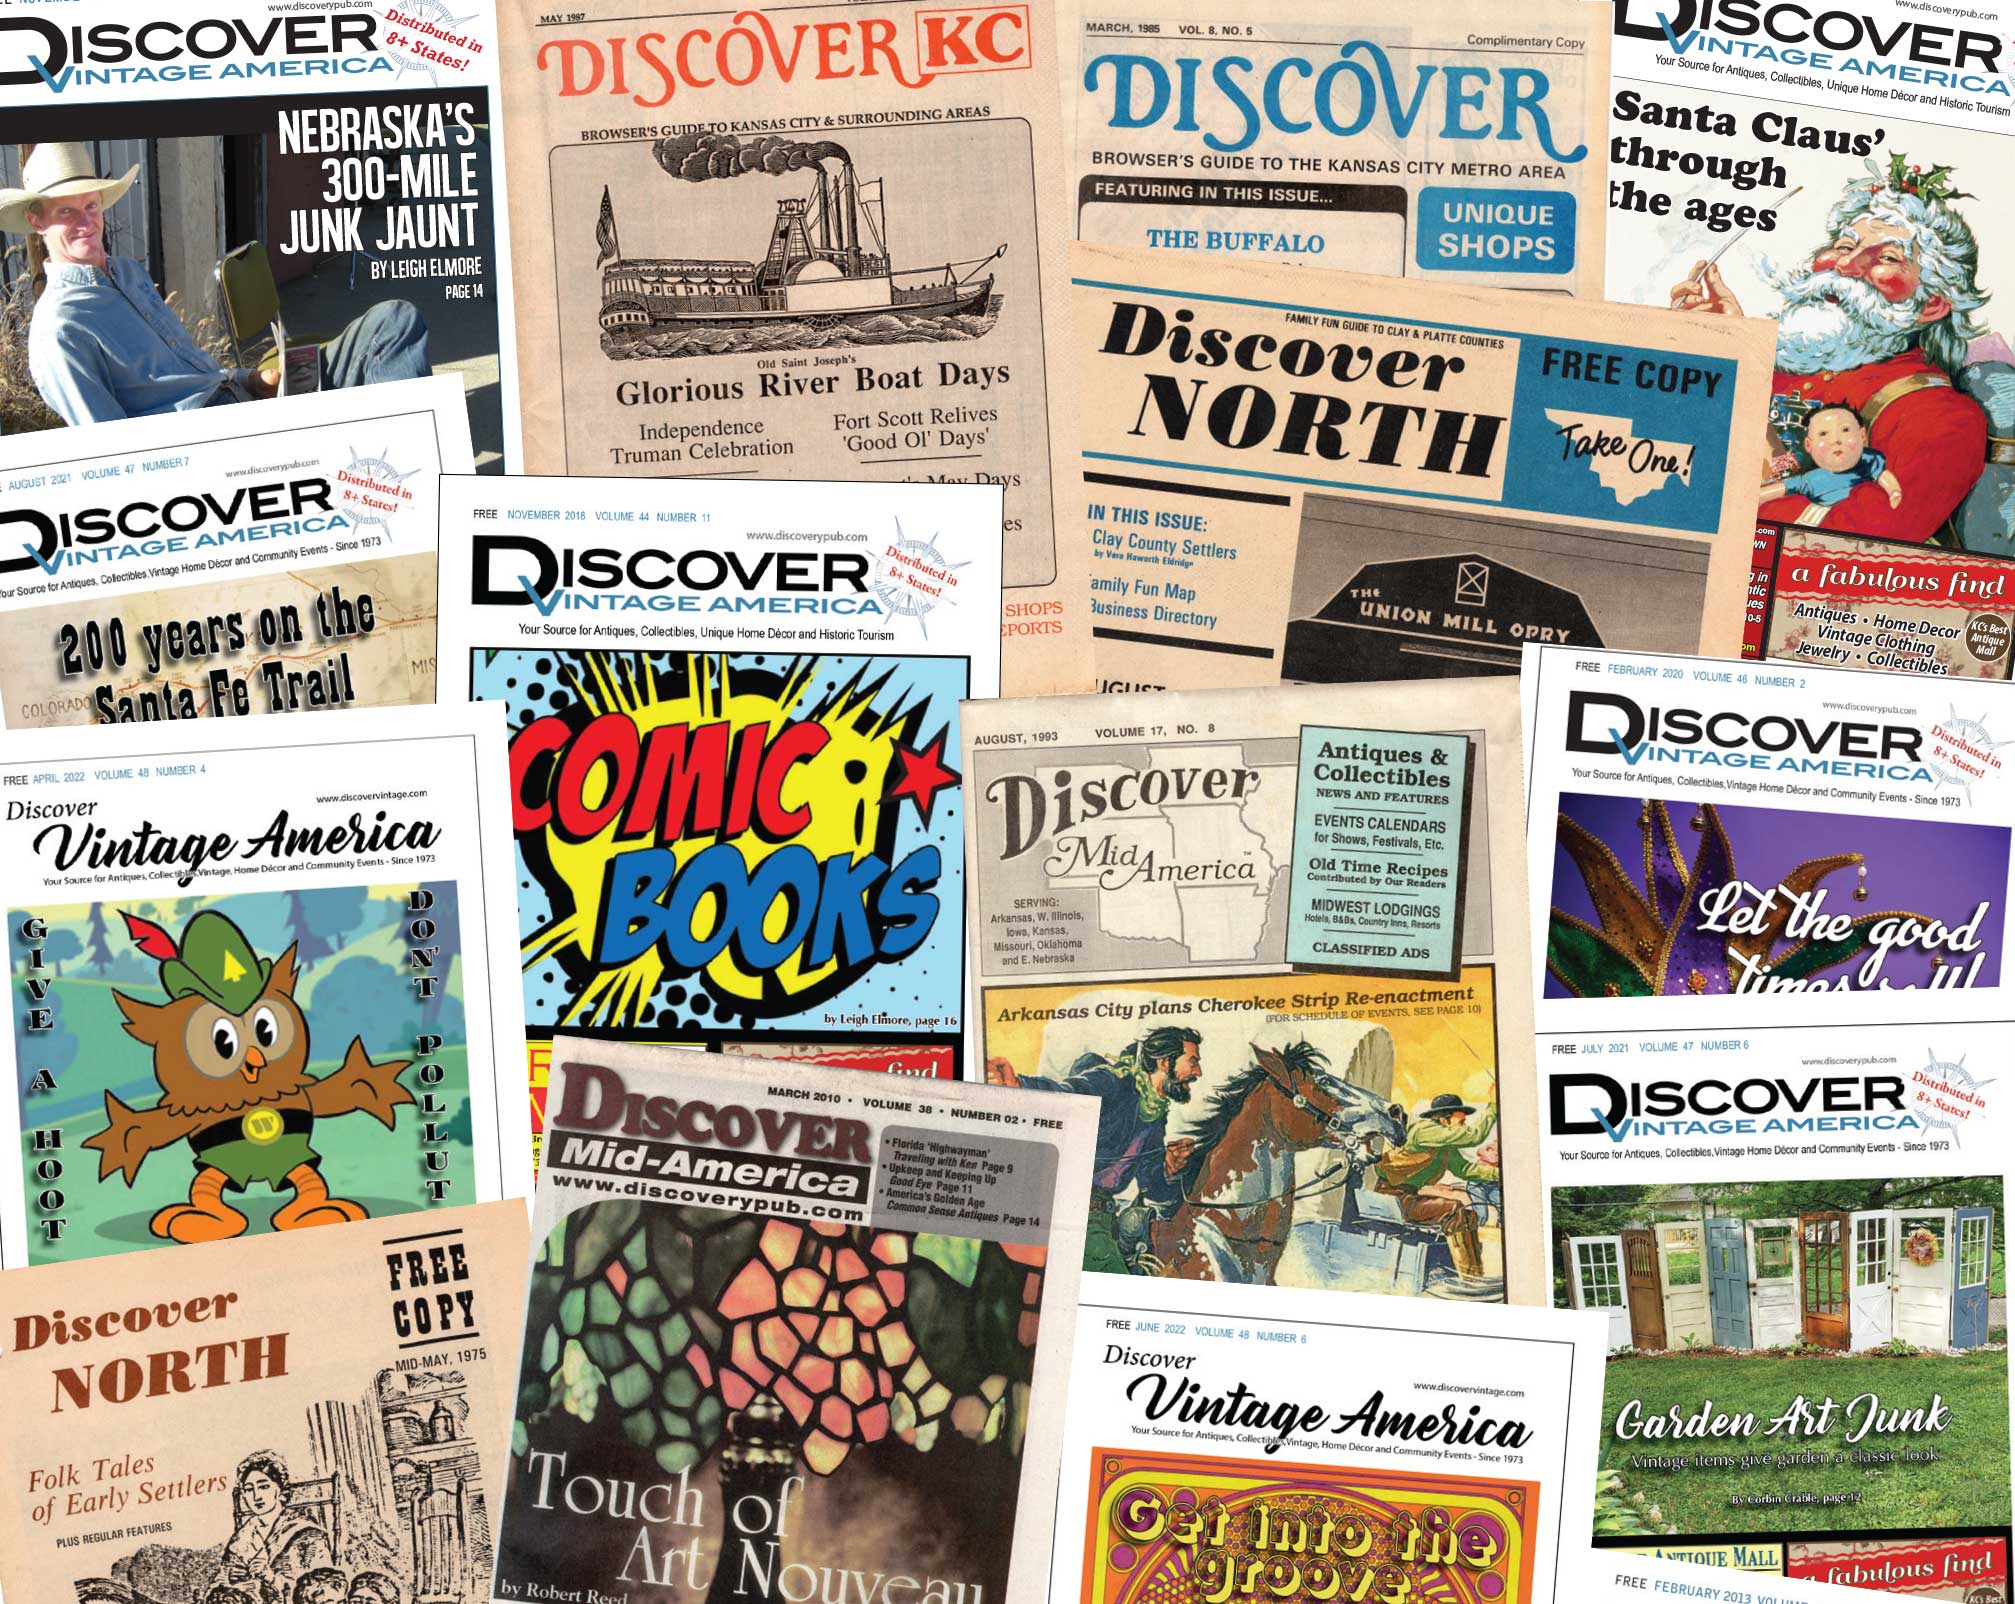 Fifty years of ‘Discovering’  began with a modest ‘guide’